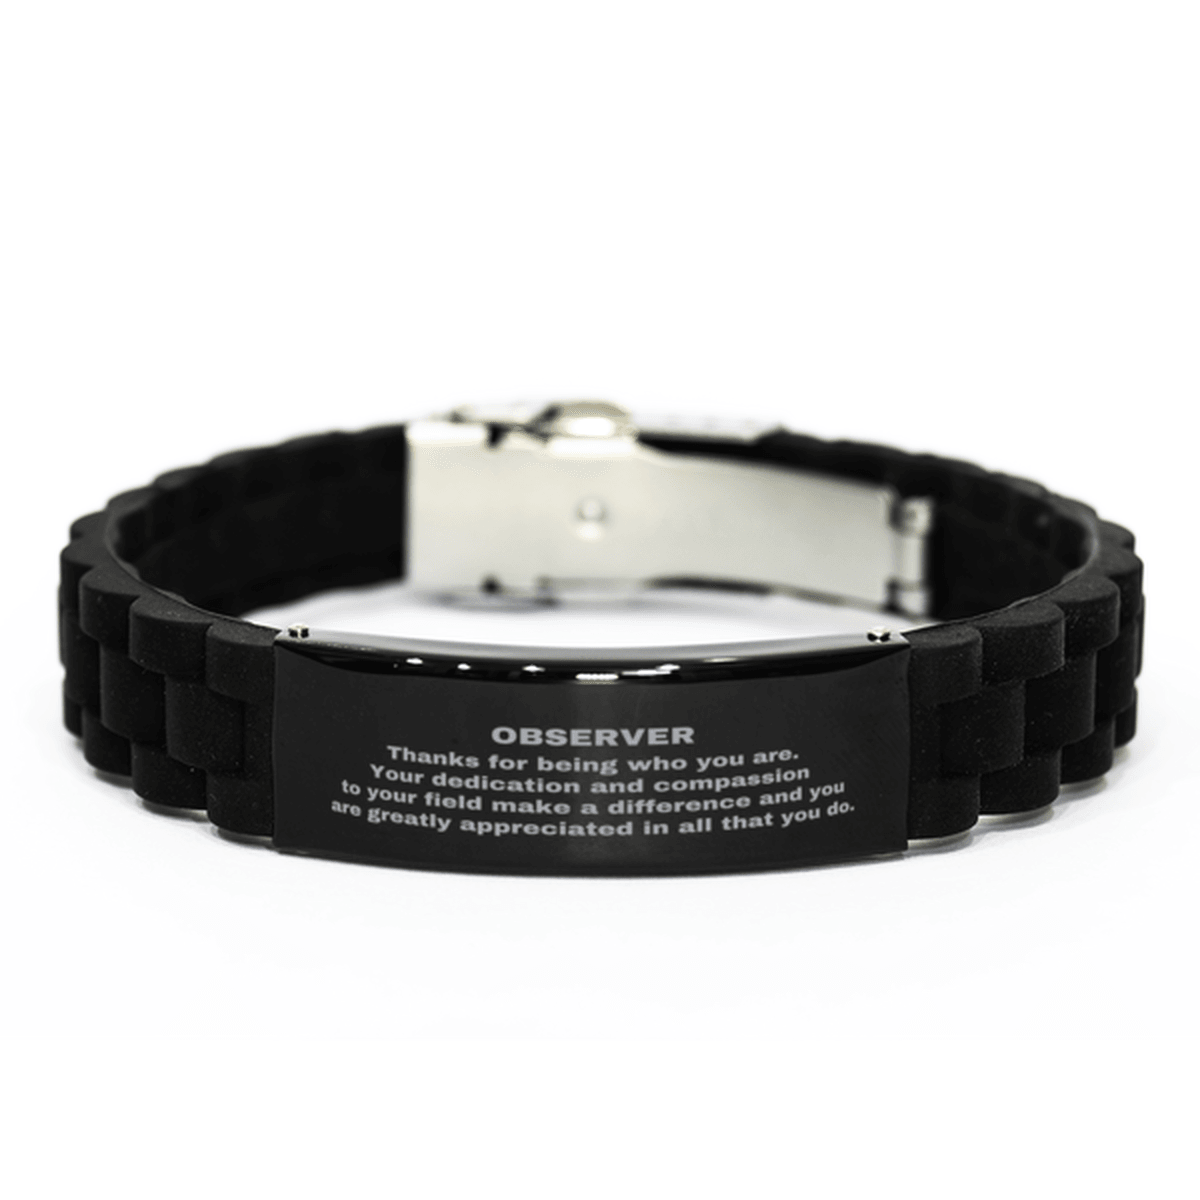 Observer Black Glidelock Clasp Engraved Bracelet - Thanks for being who you are - Birthday Christmas Jewelry Gifts Coworkers Colleague Boss